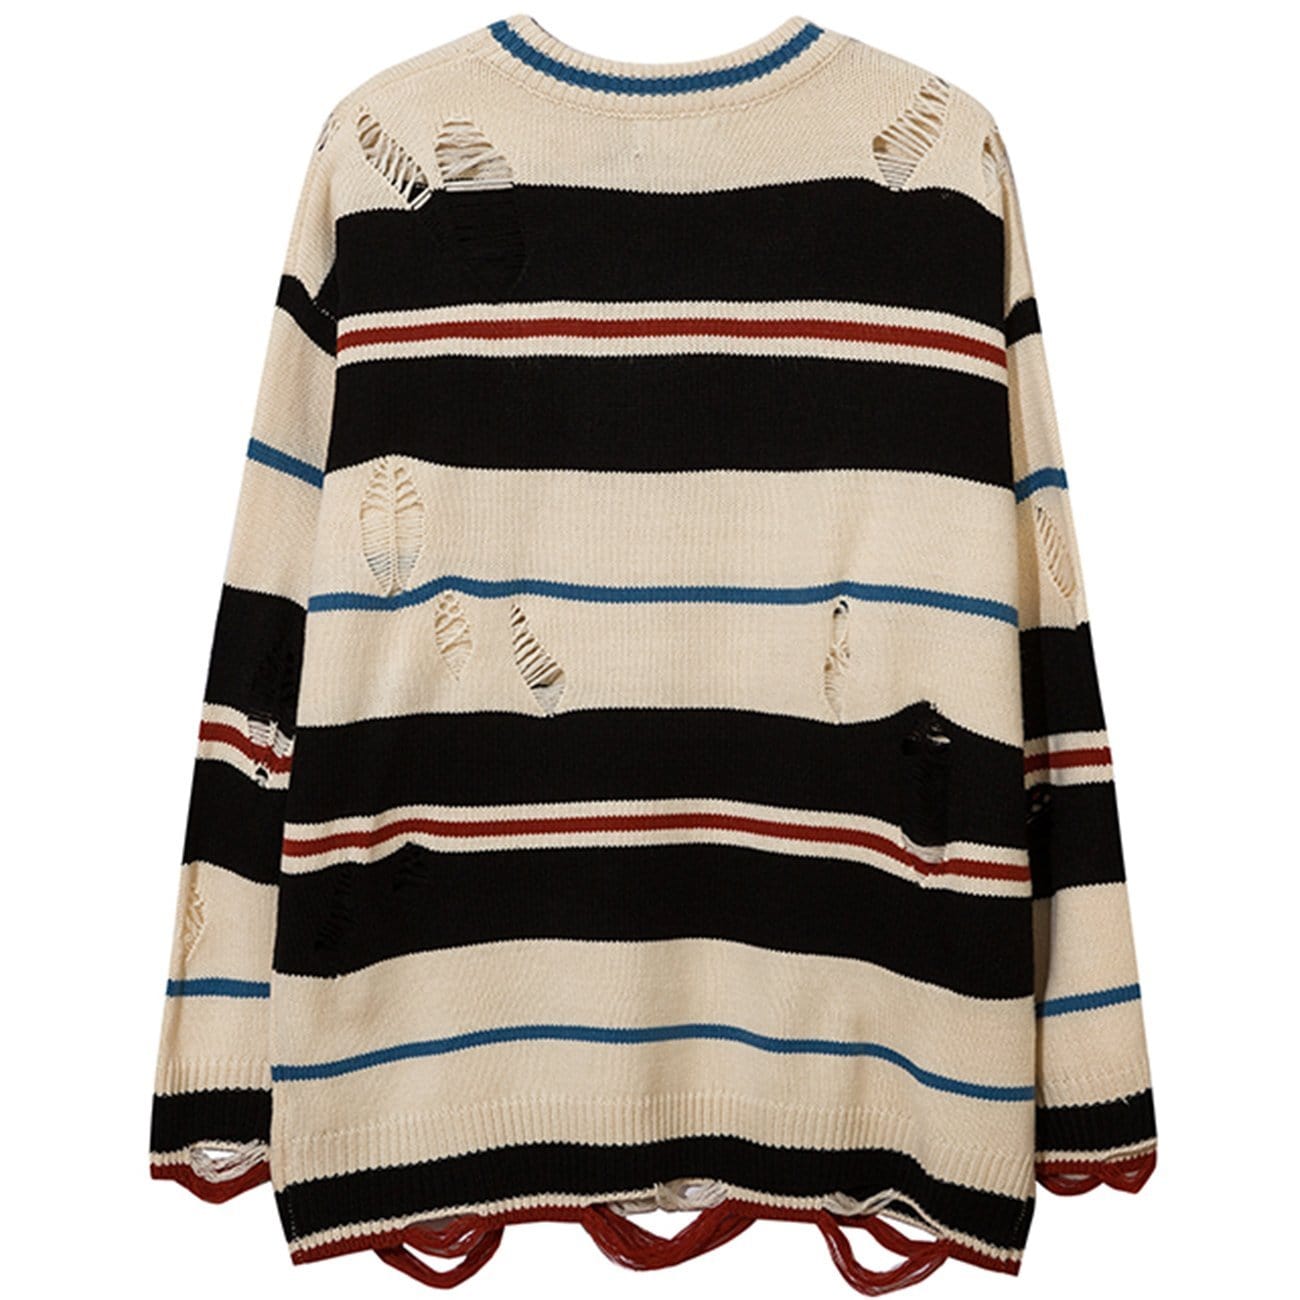 TO Ripped Hole Stripe Knit Sweater